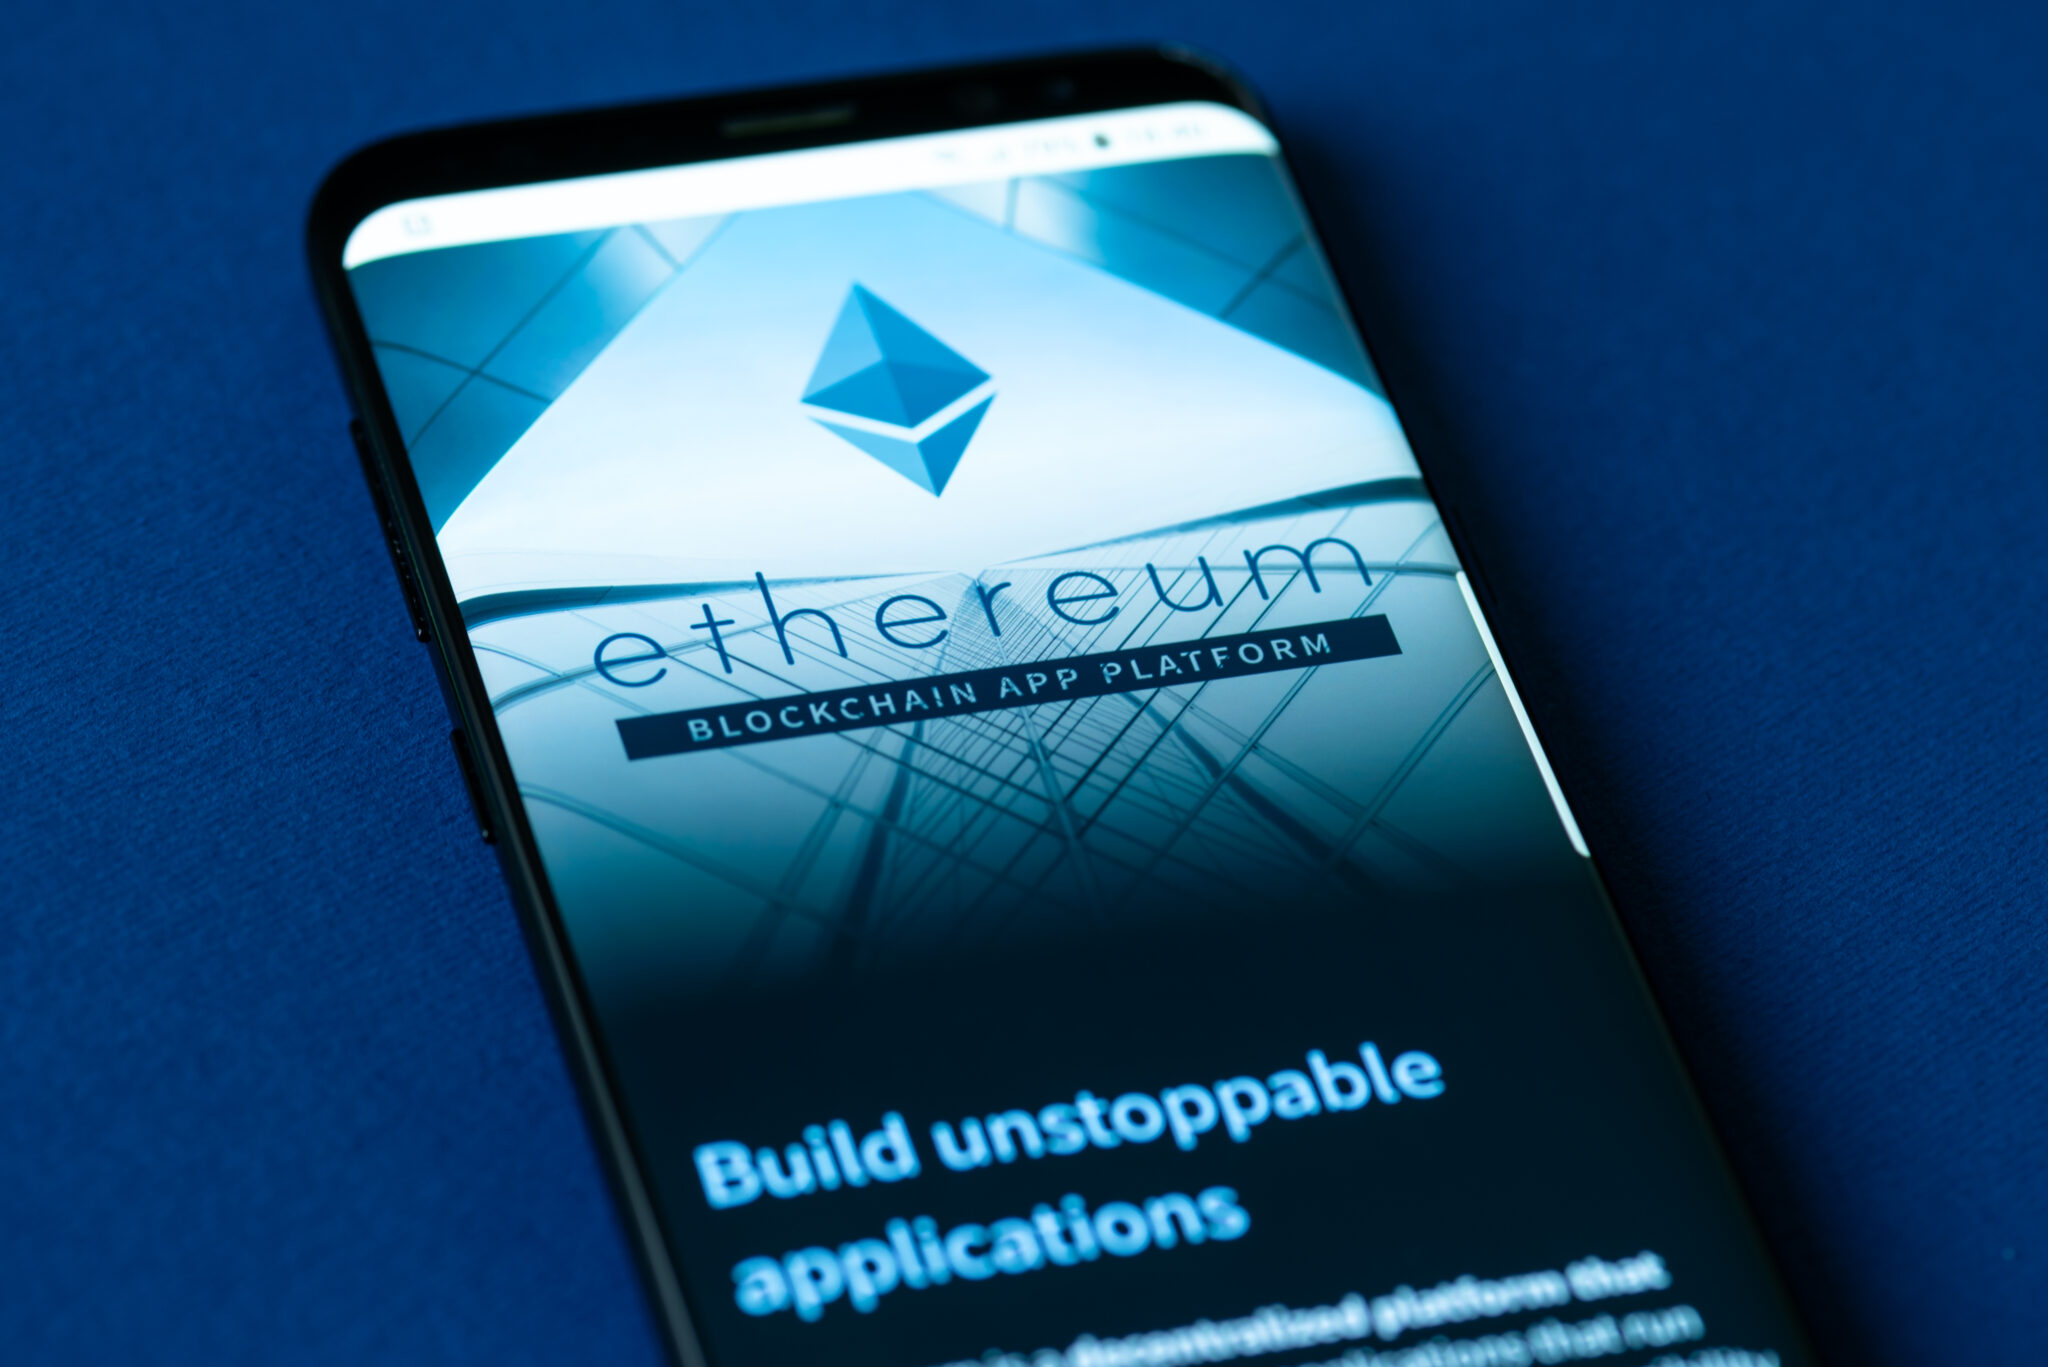 KYRENIA, CYPRUS - SEPTEMBER 8, 2018: Official website of Ethereum project displayed on the smartphone screen. Etherem is an open source public blockchain based distributed computing platform and OS